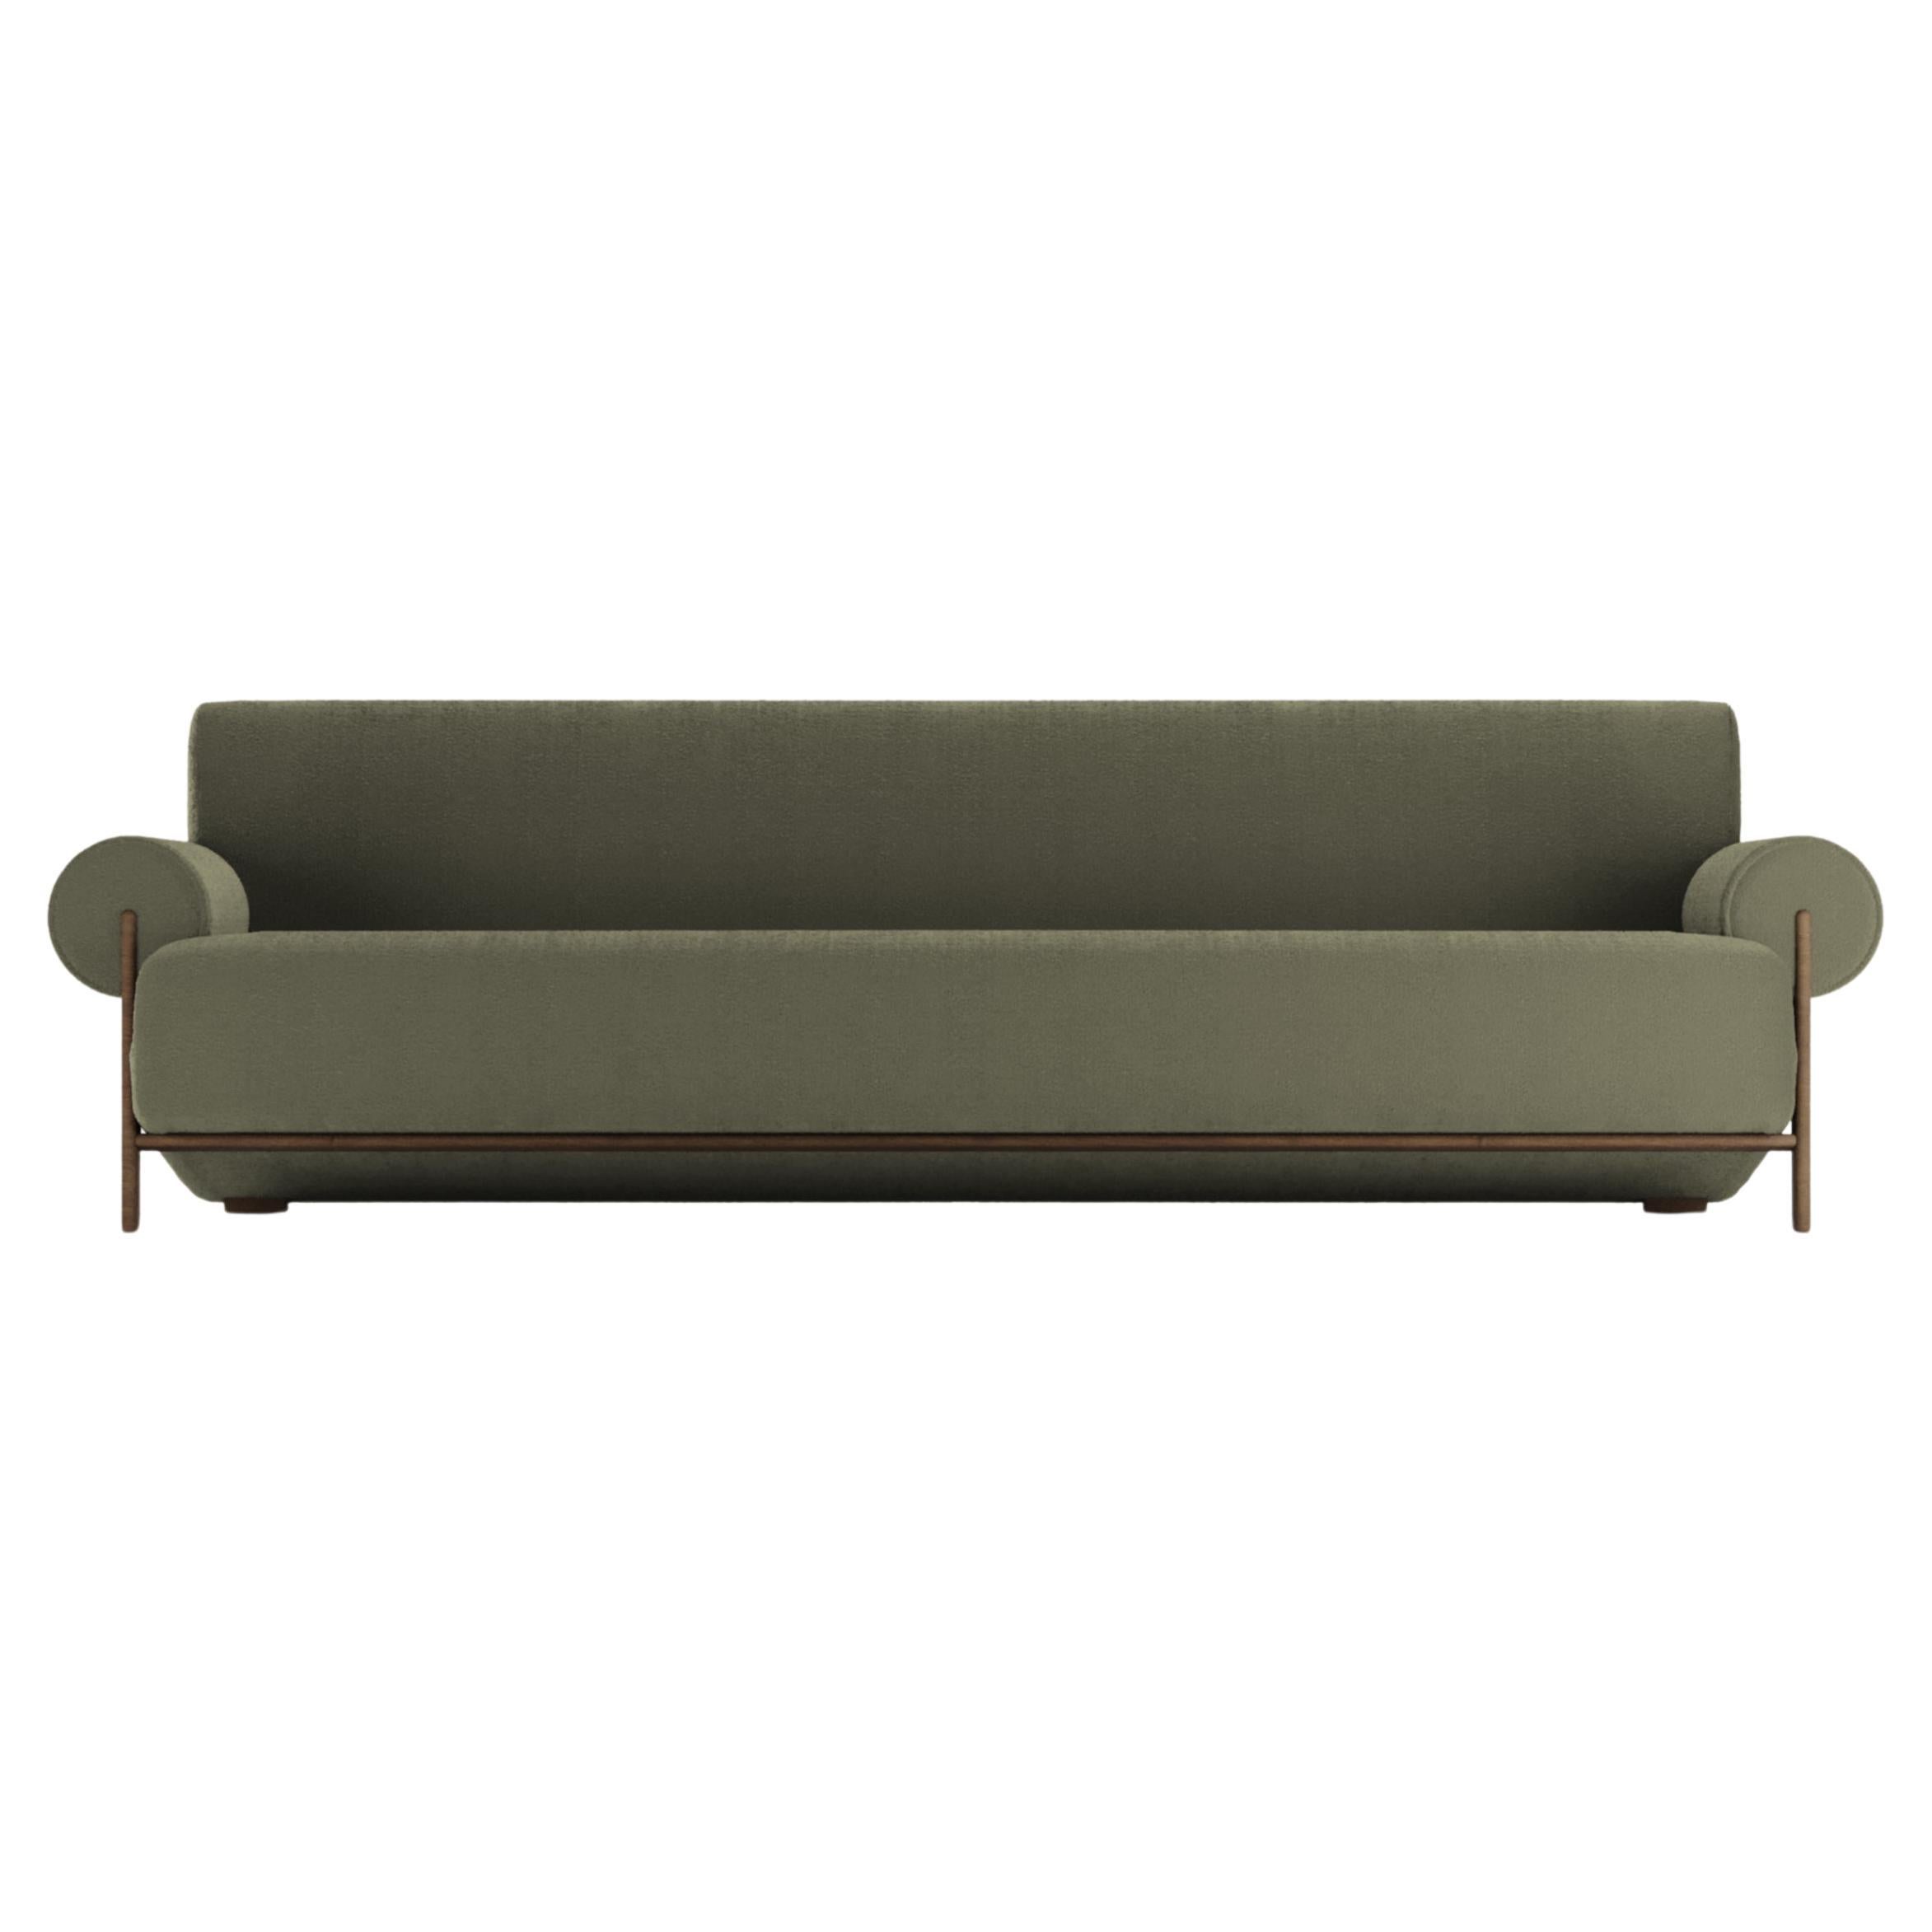 Contemporary Modern Paloma Sofa in Bouclé Olive by Collector